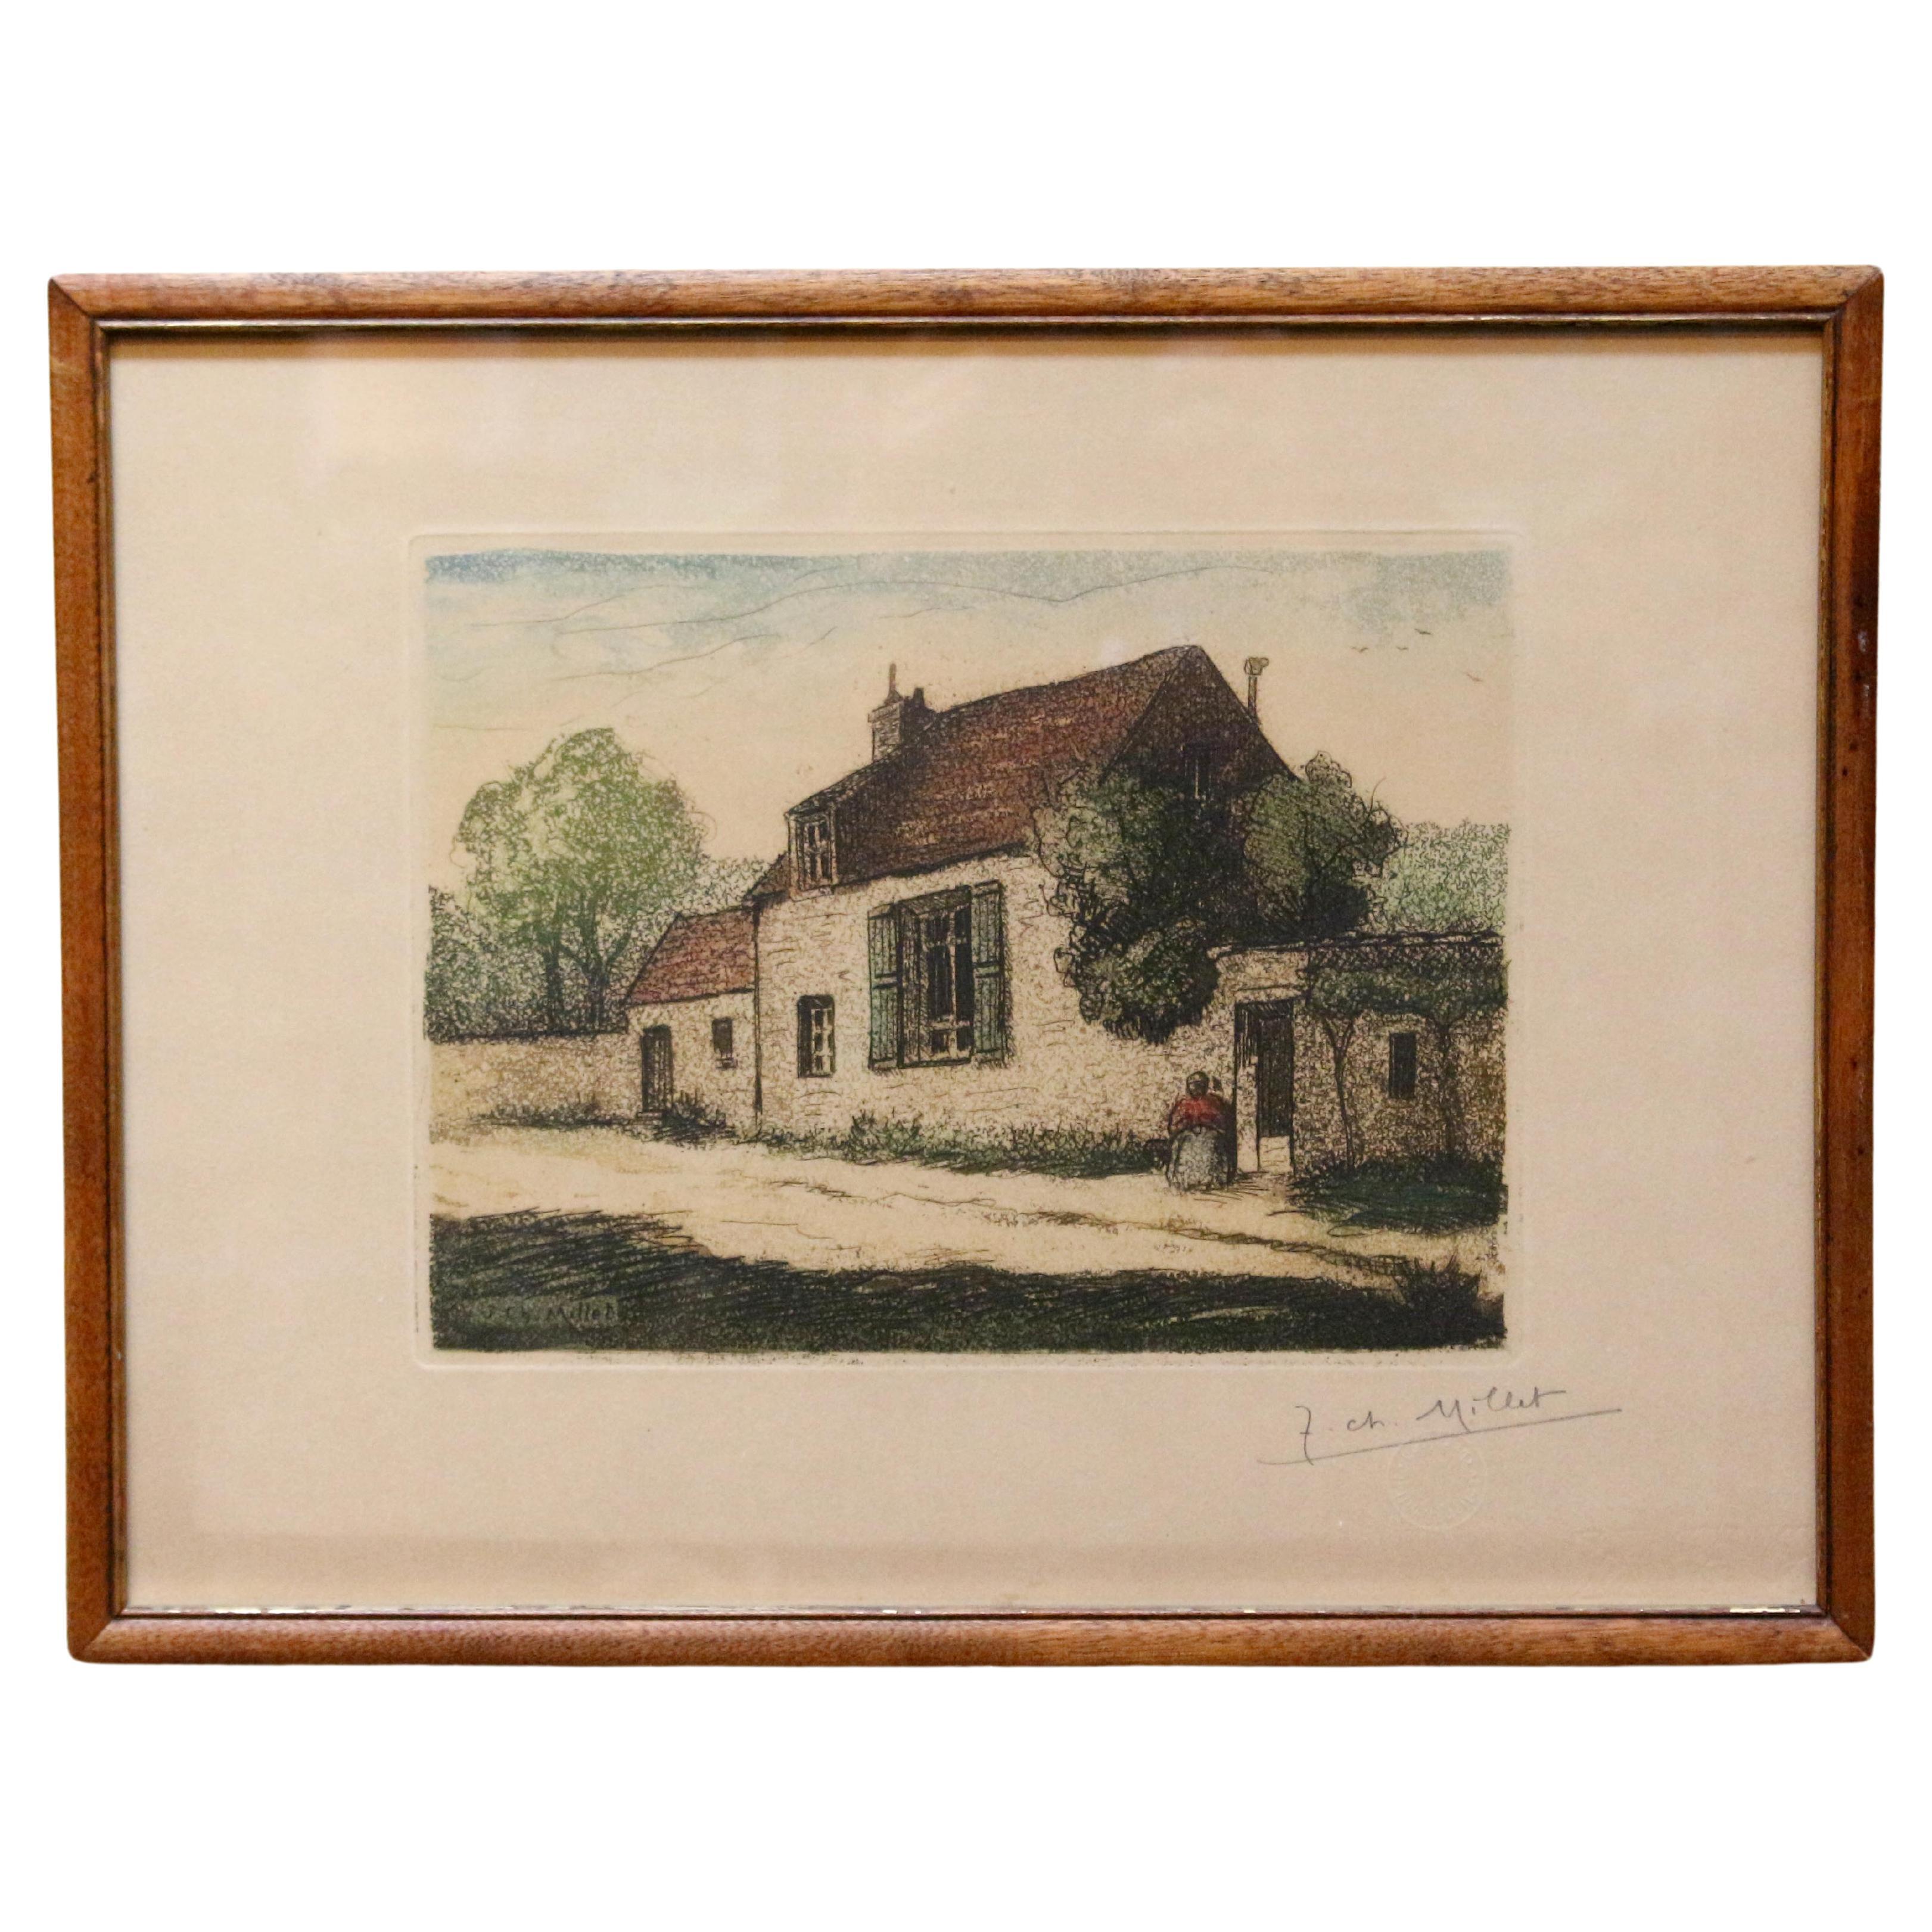 20th Century "The Millet Family Home" by Jean-Charles Millet, French